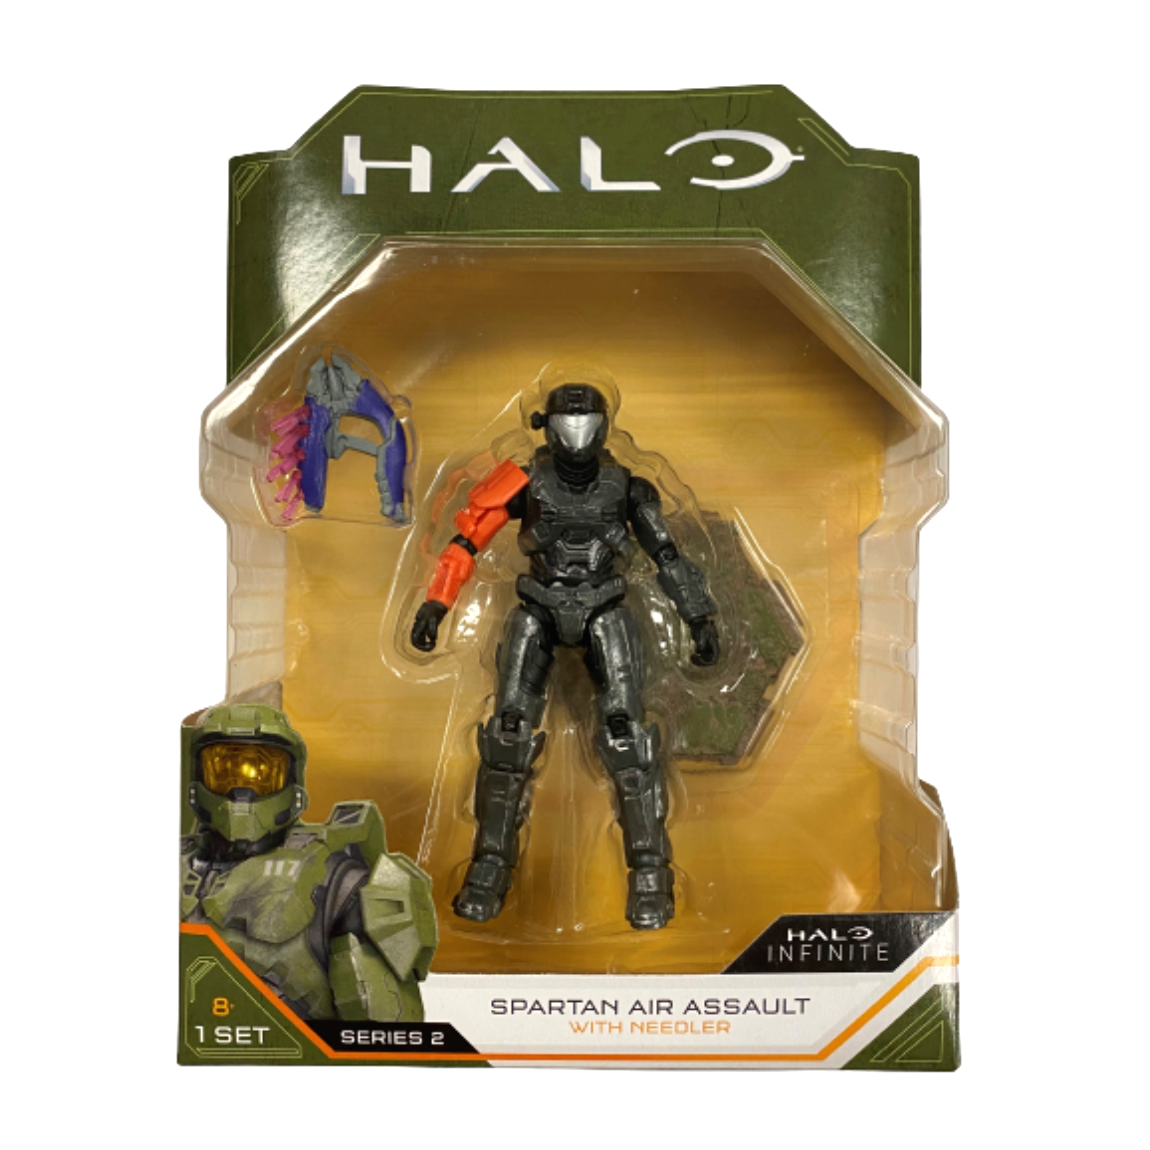 Halo Infinite Spartan Air Assault with Needler 4" Core Action Figure - Series 2-1